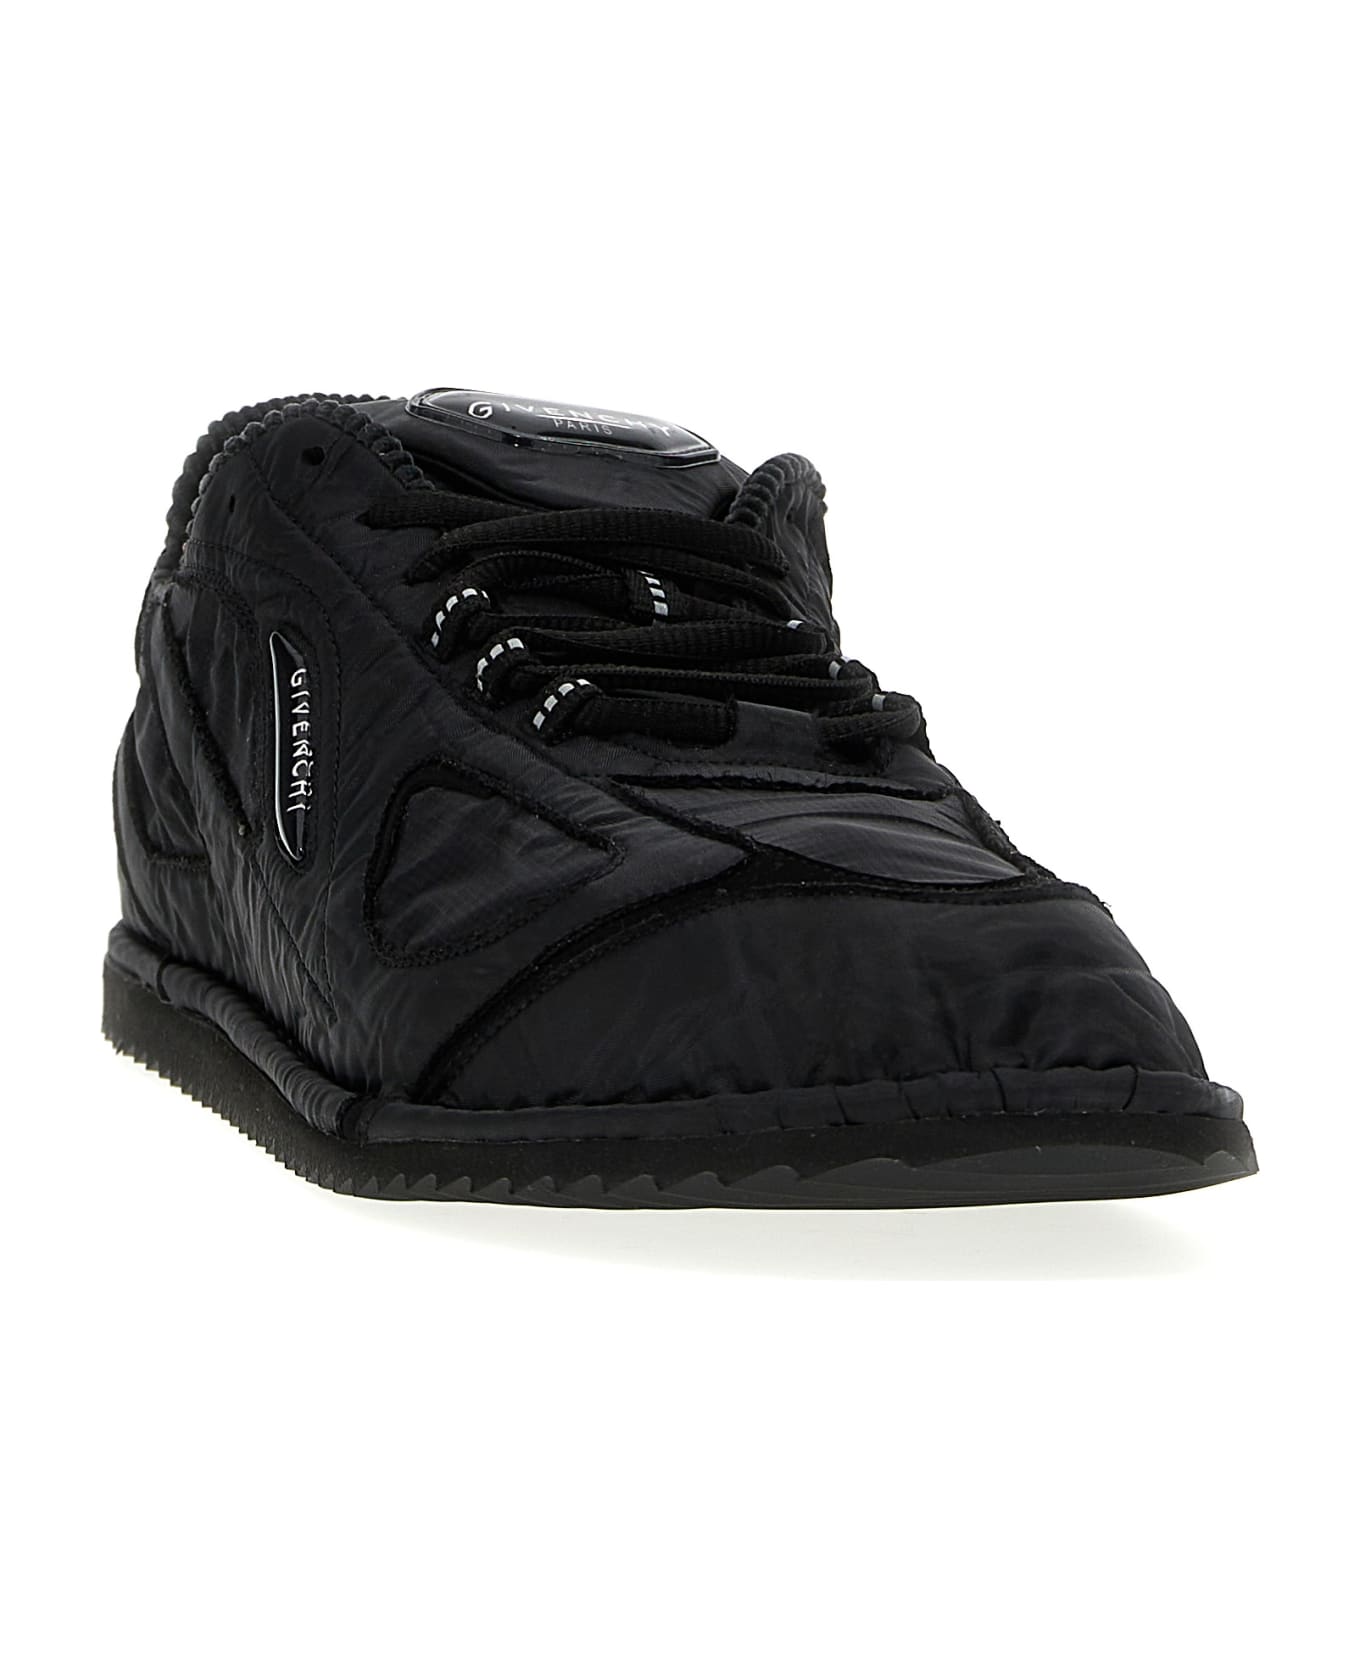 Givenchy Sneakers - Black スニーカー